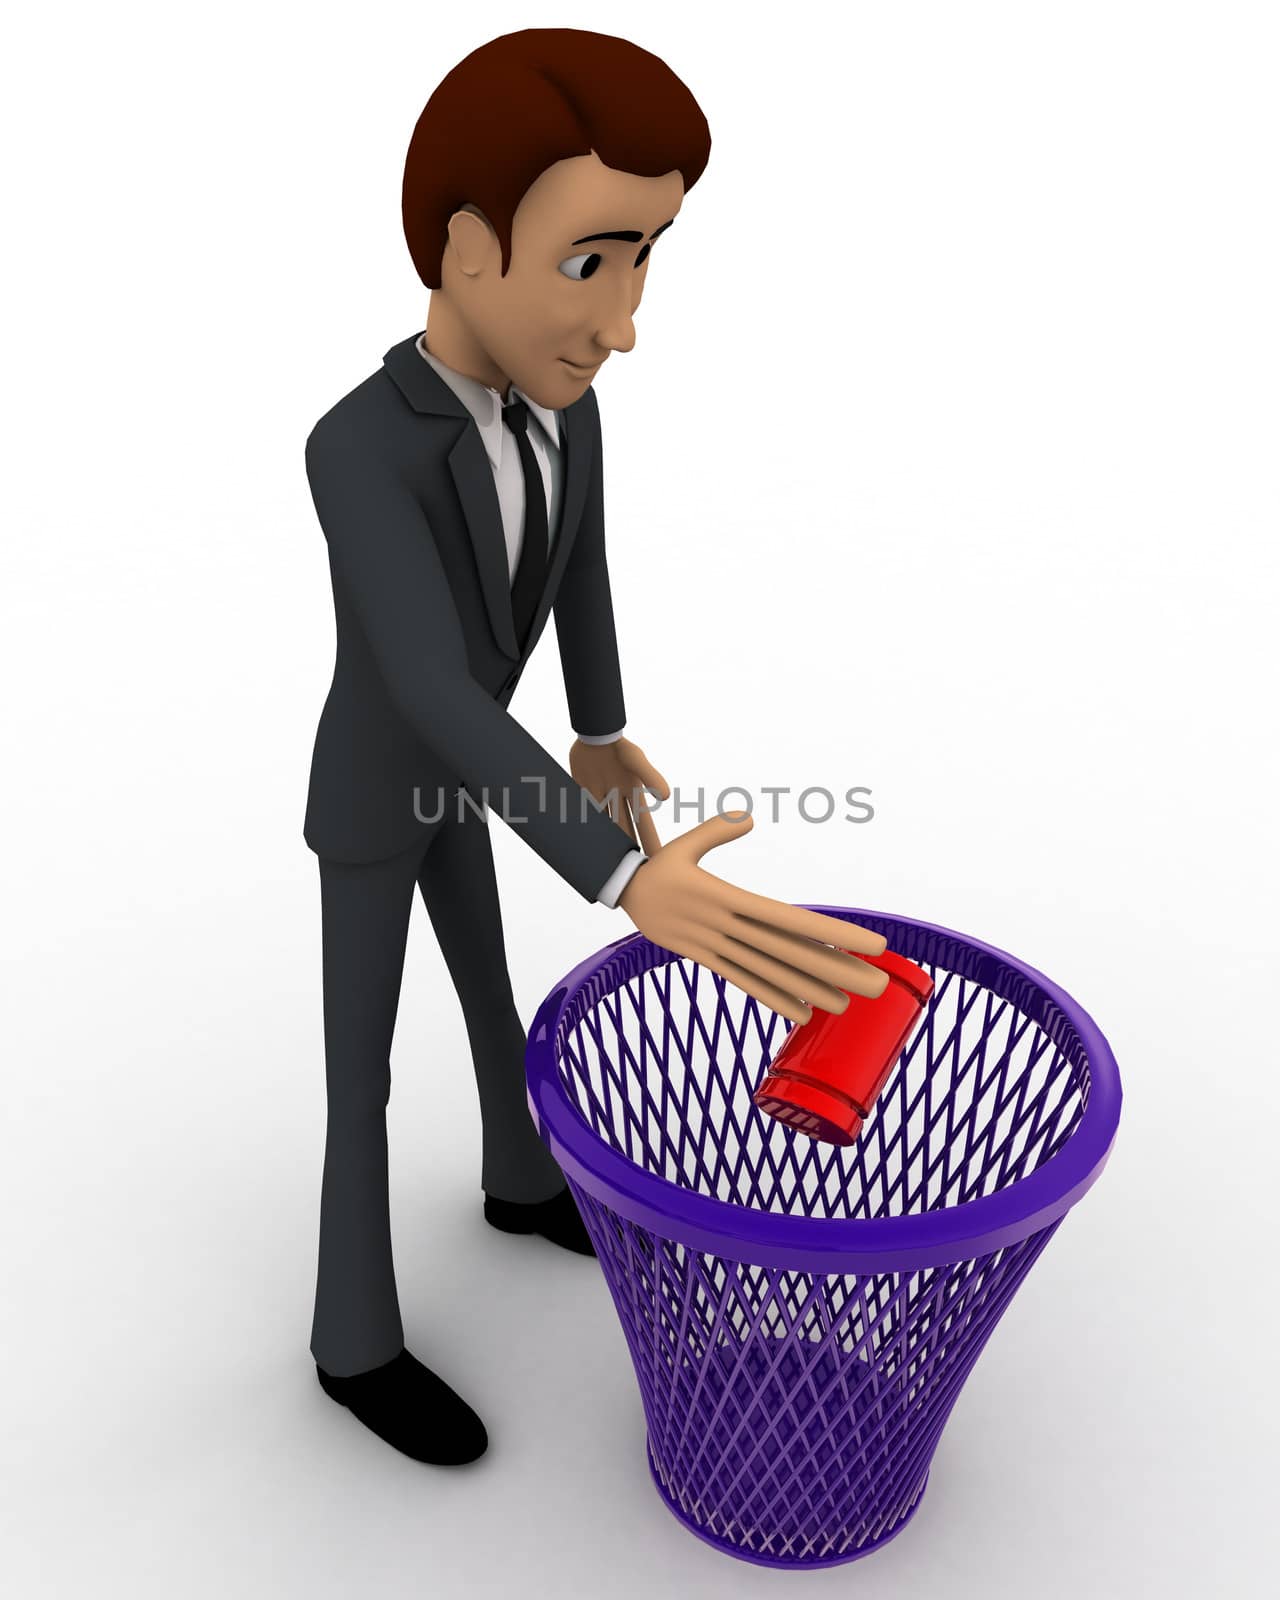 3d man throughing waste in dustbin concept by touchmenithin@gmail.com